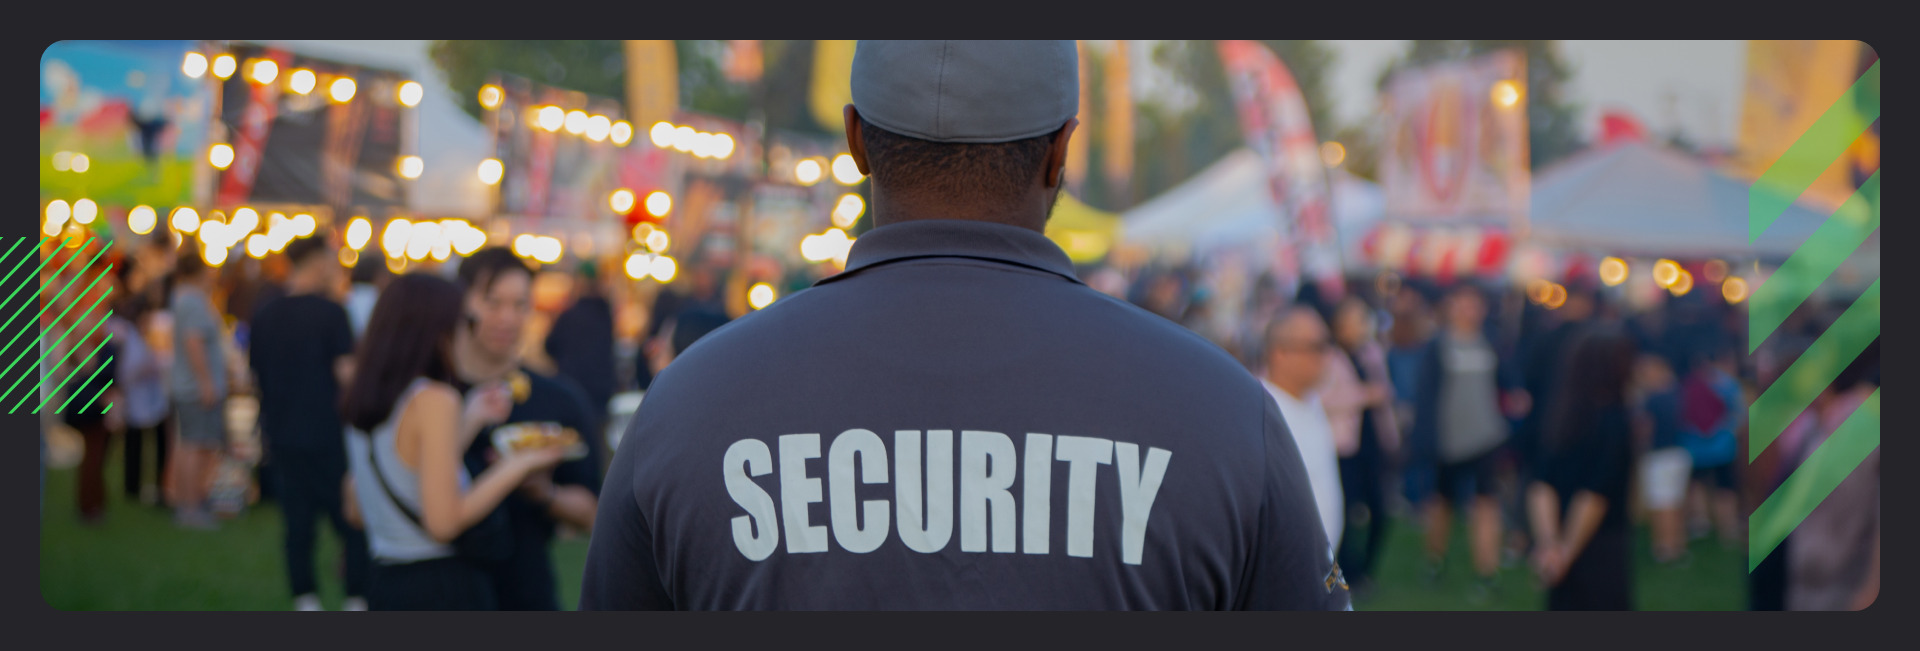 security at large events